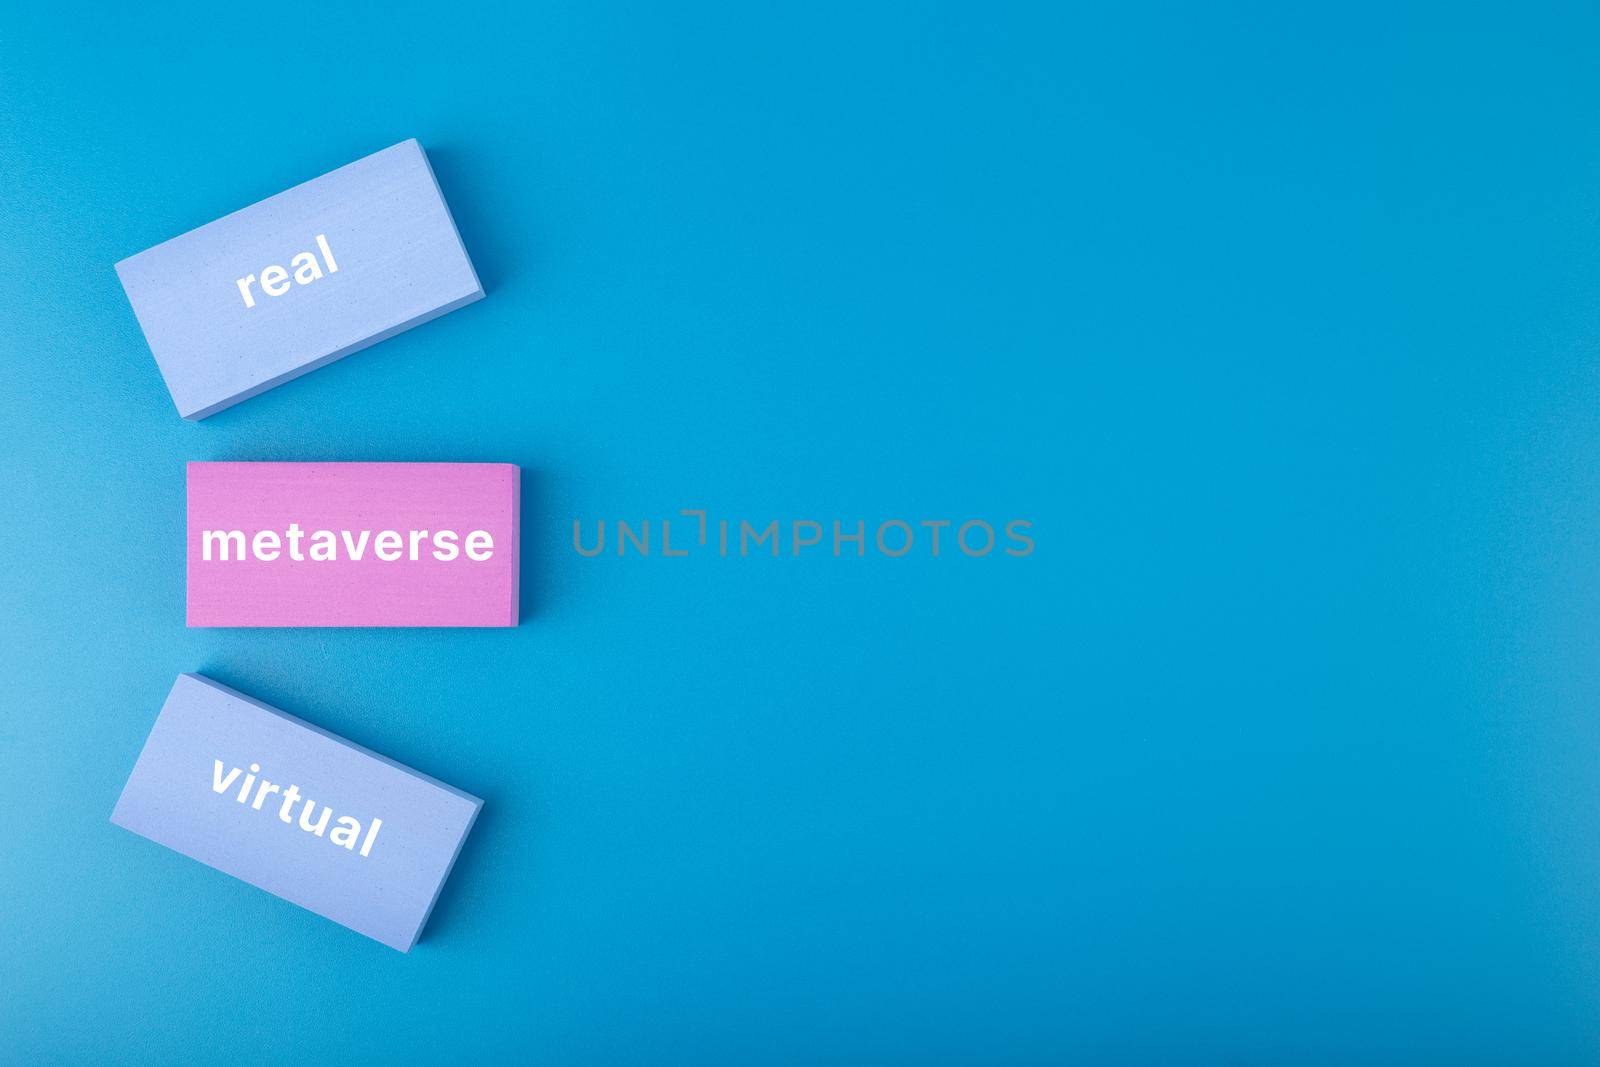 Metaverse modern minimal concept in blue colors with copy space. Written metaverse, real, virtual words on blue and pink rectangles against blue background. Future technologies.